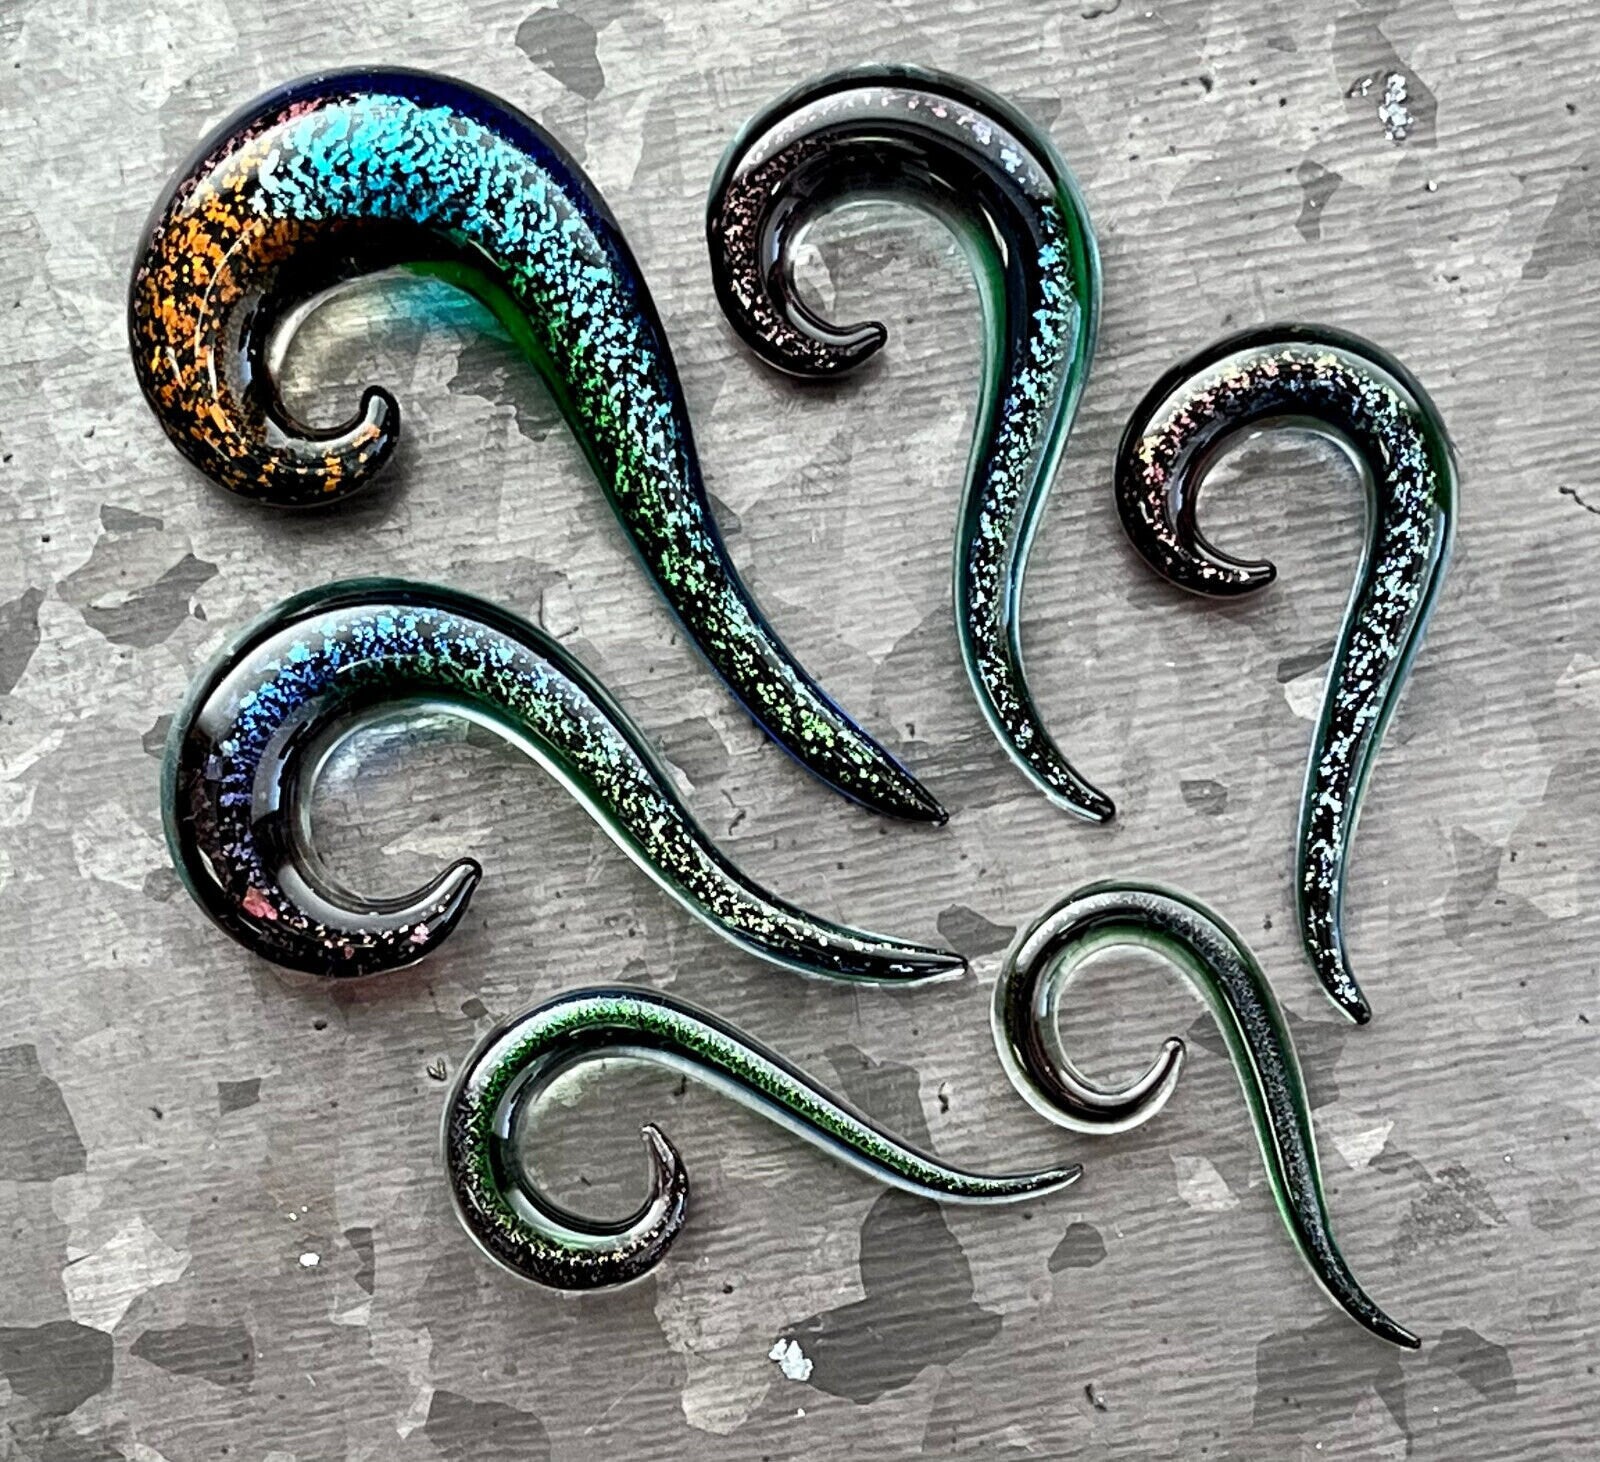 PAIR of Stunning Rainbow Dichroic Glass Spiral Hanging Tapers/Plugs - Expanders - Gauges 4g (5mm) thru 5/8" (16mm) Available!